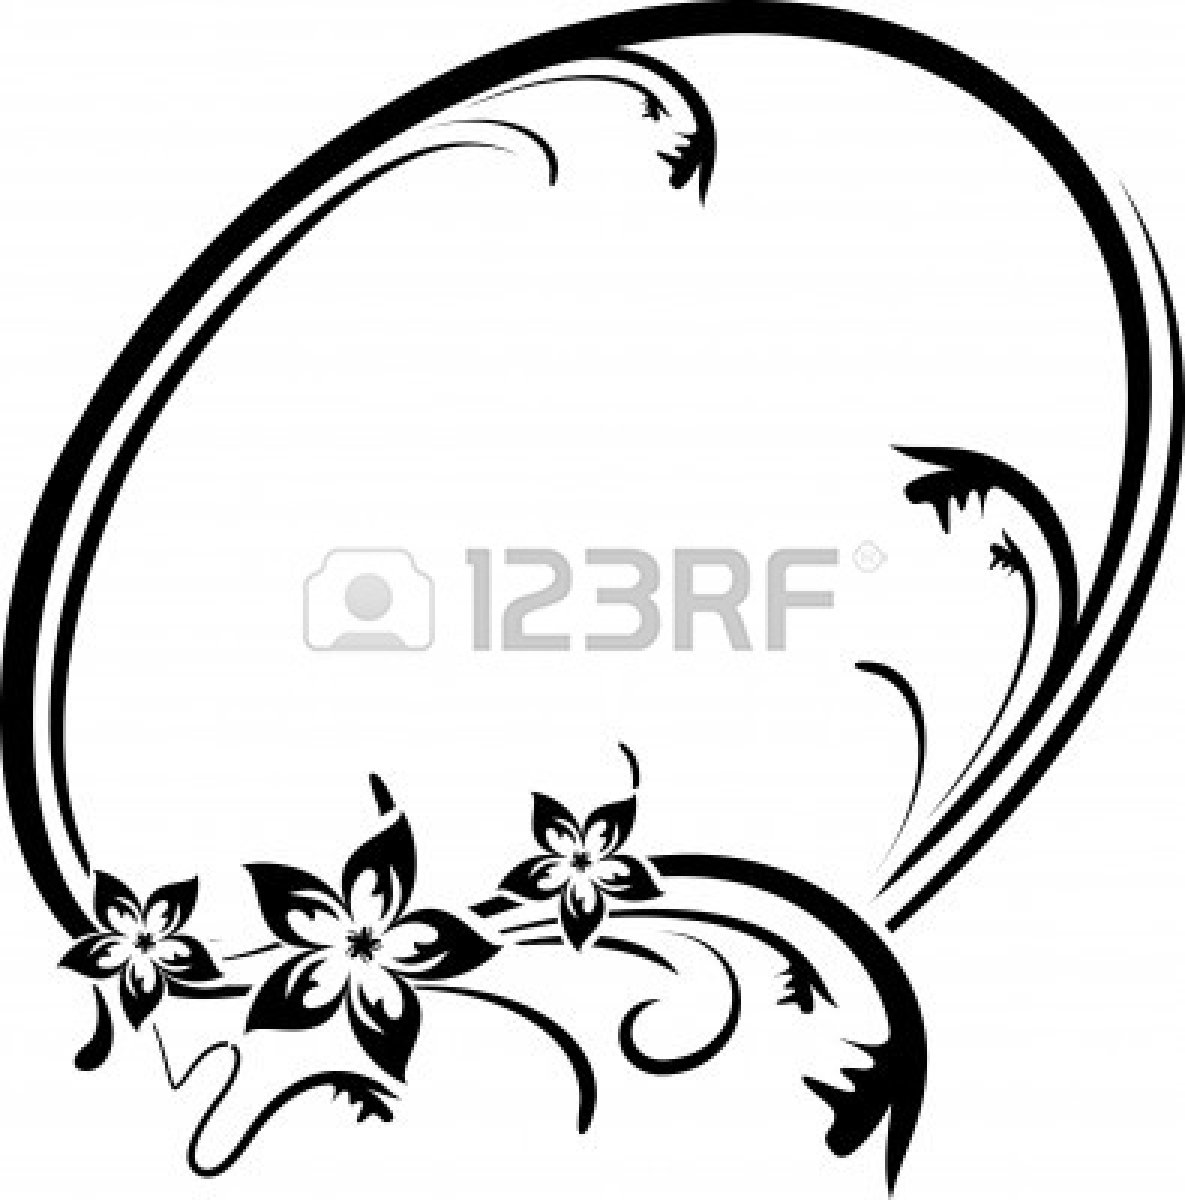 Pink Oval Frame Clipart   Clipart Panda   Free Clipart Images